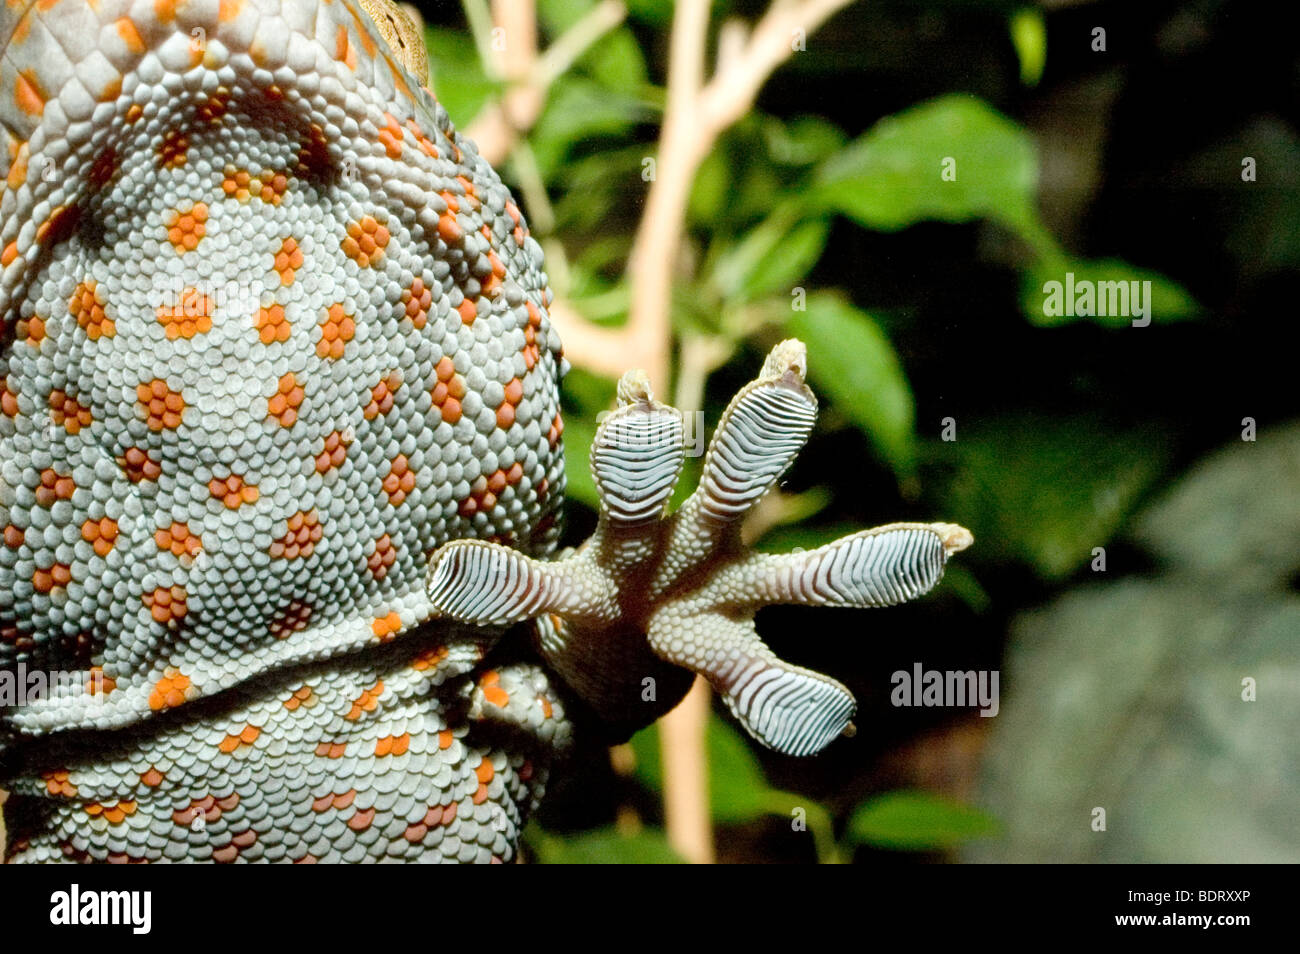 Orange spotted gecko with his foot and pads up the glass Stock Photo